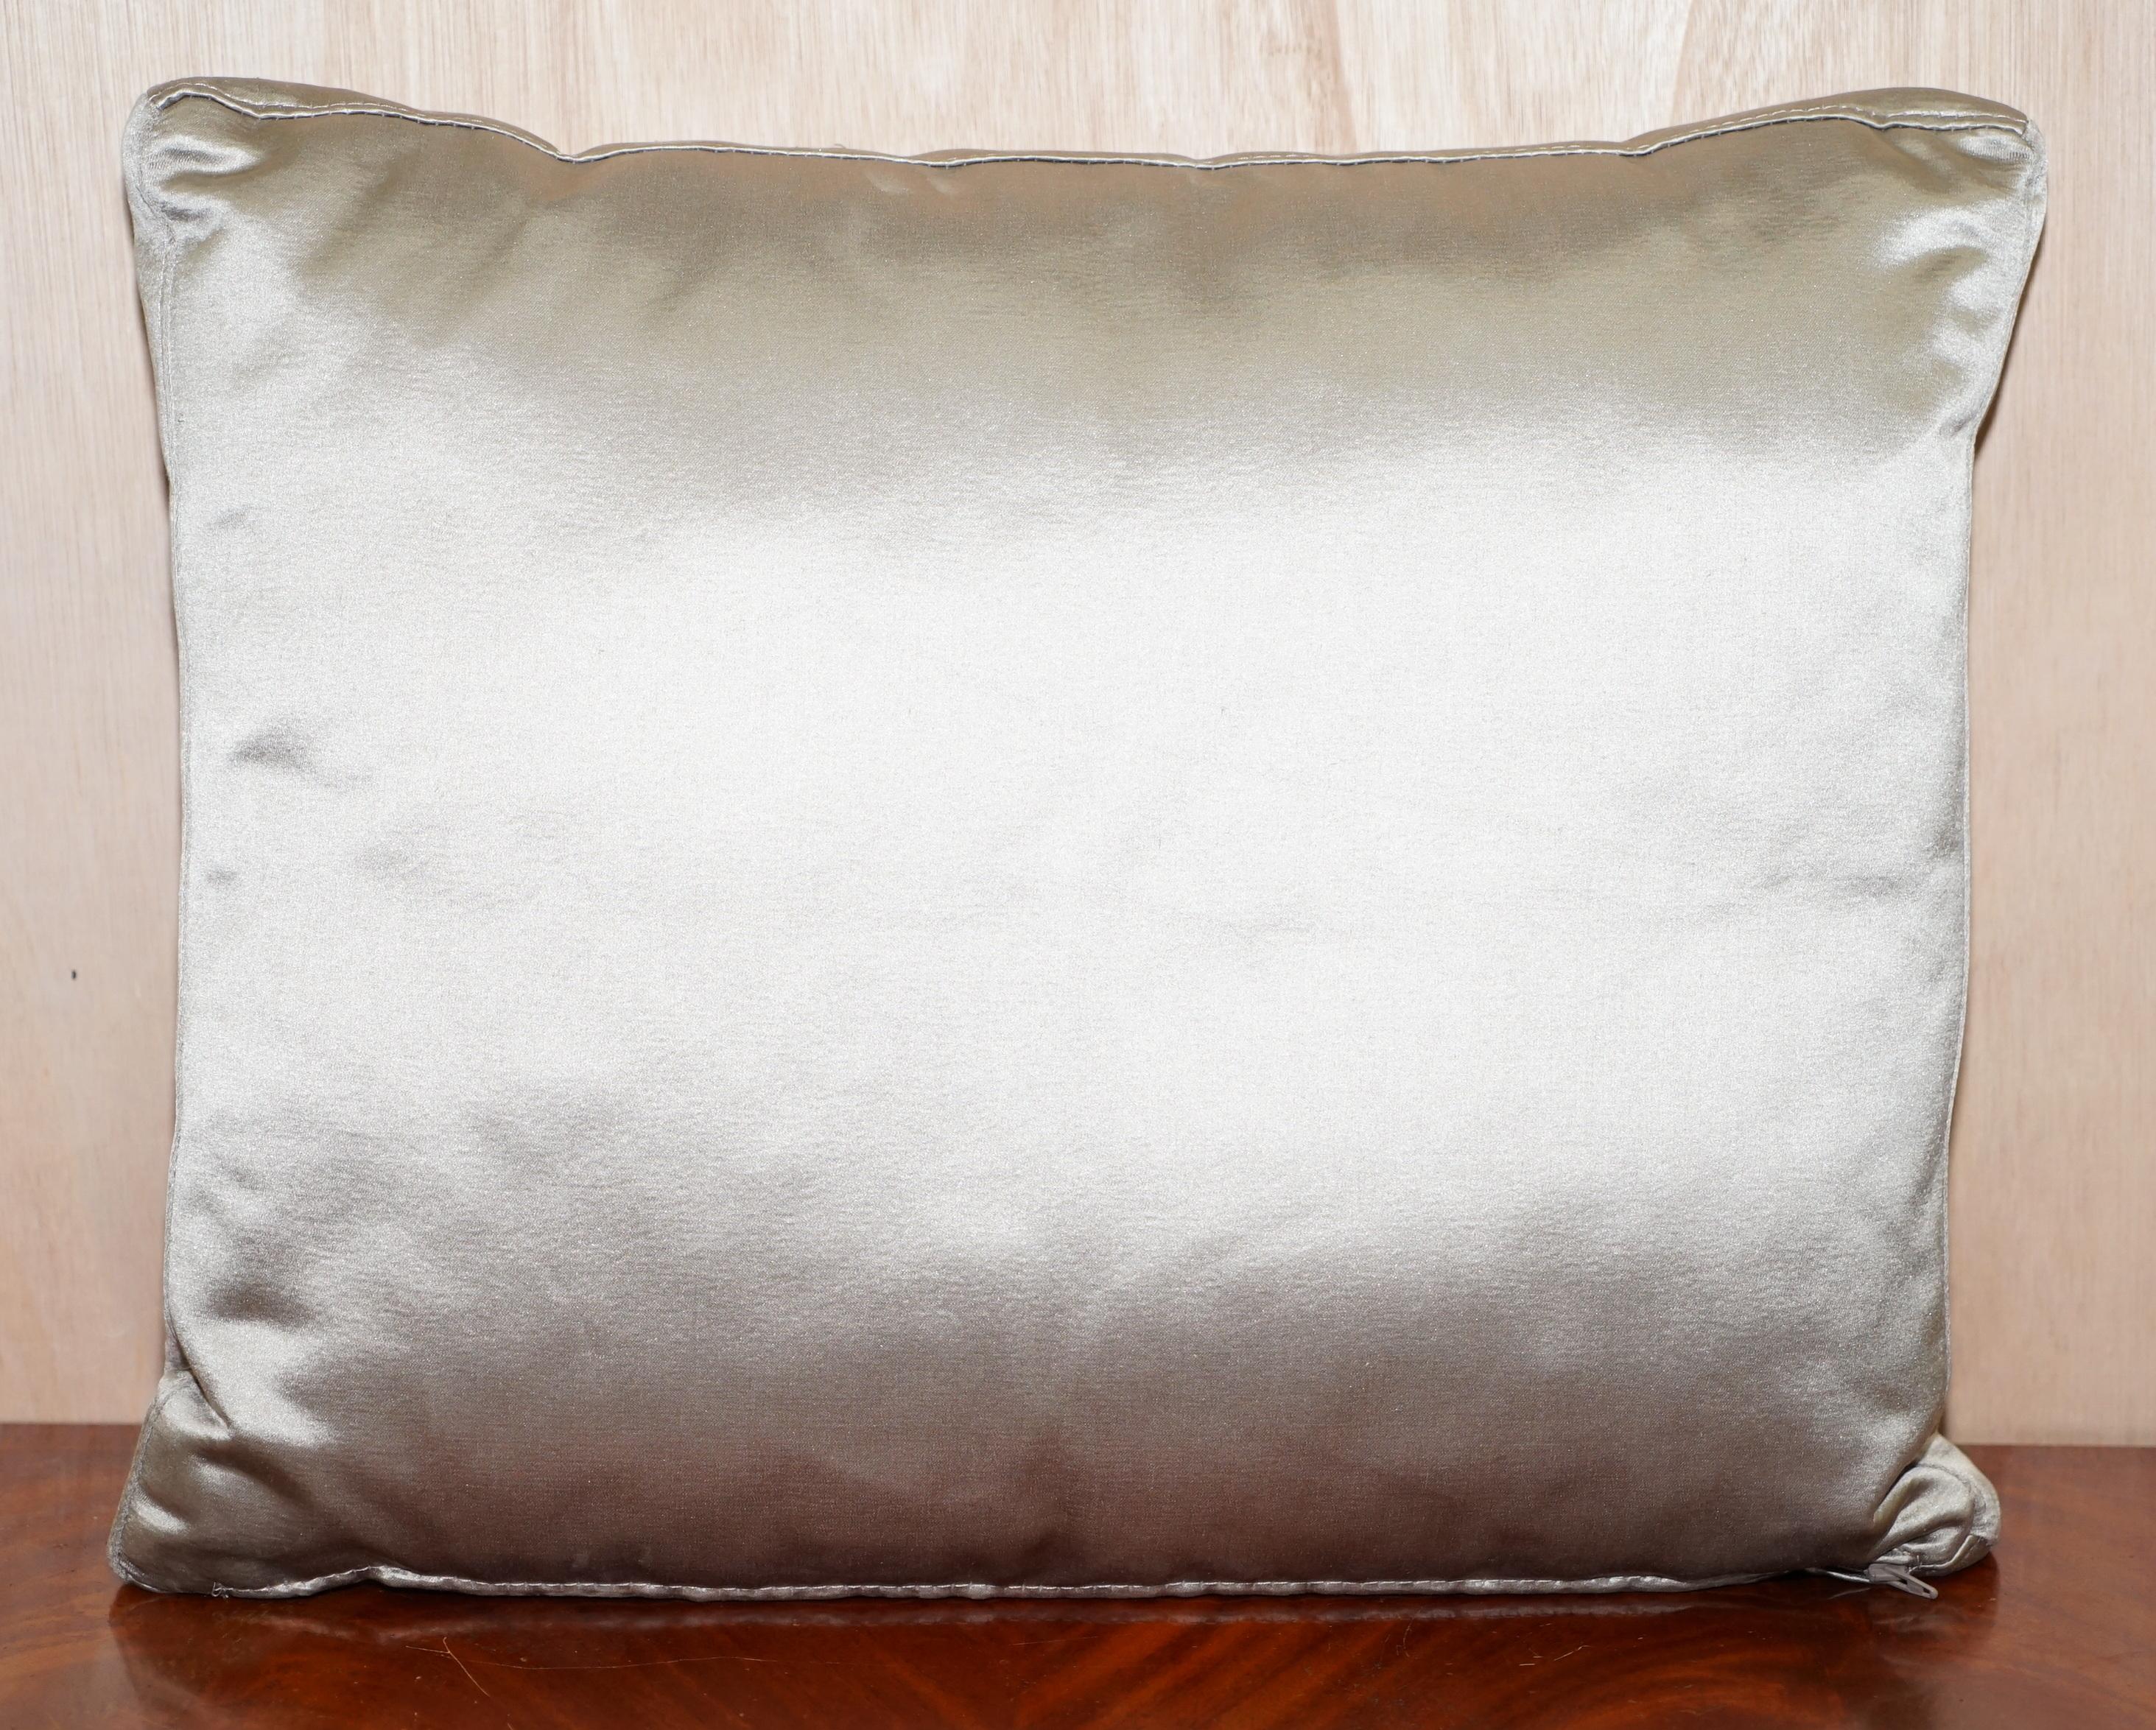 Modern Lovely Pair of Large Silver Scatter Cushions from Fendi Sofa Luxury Silky Finish